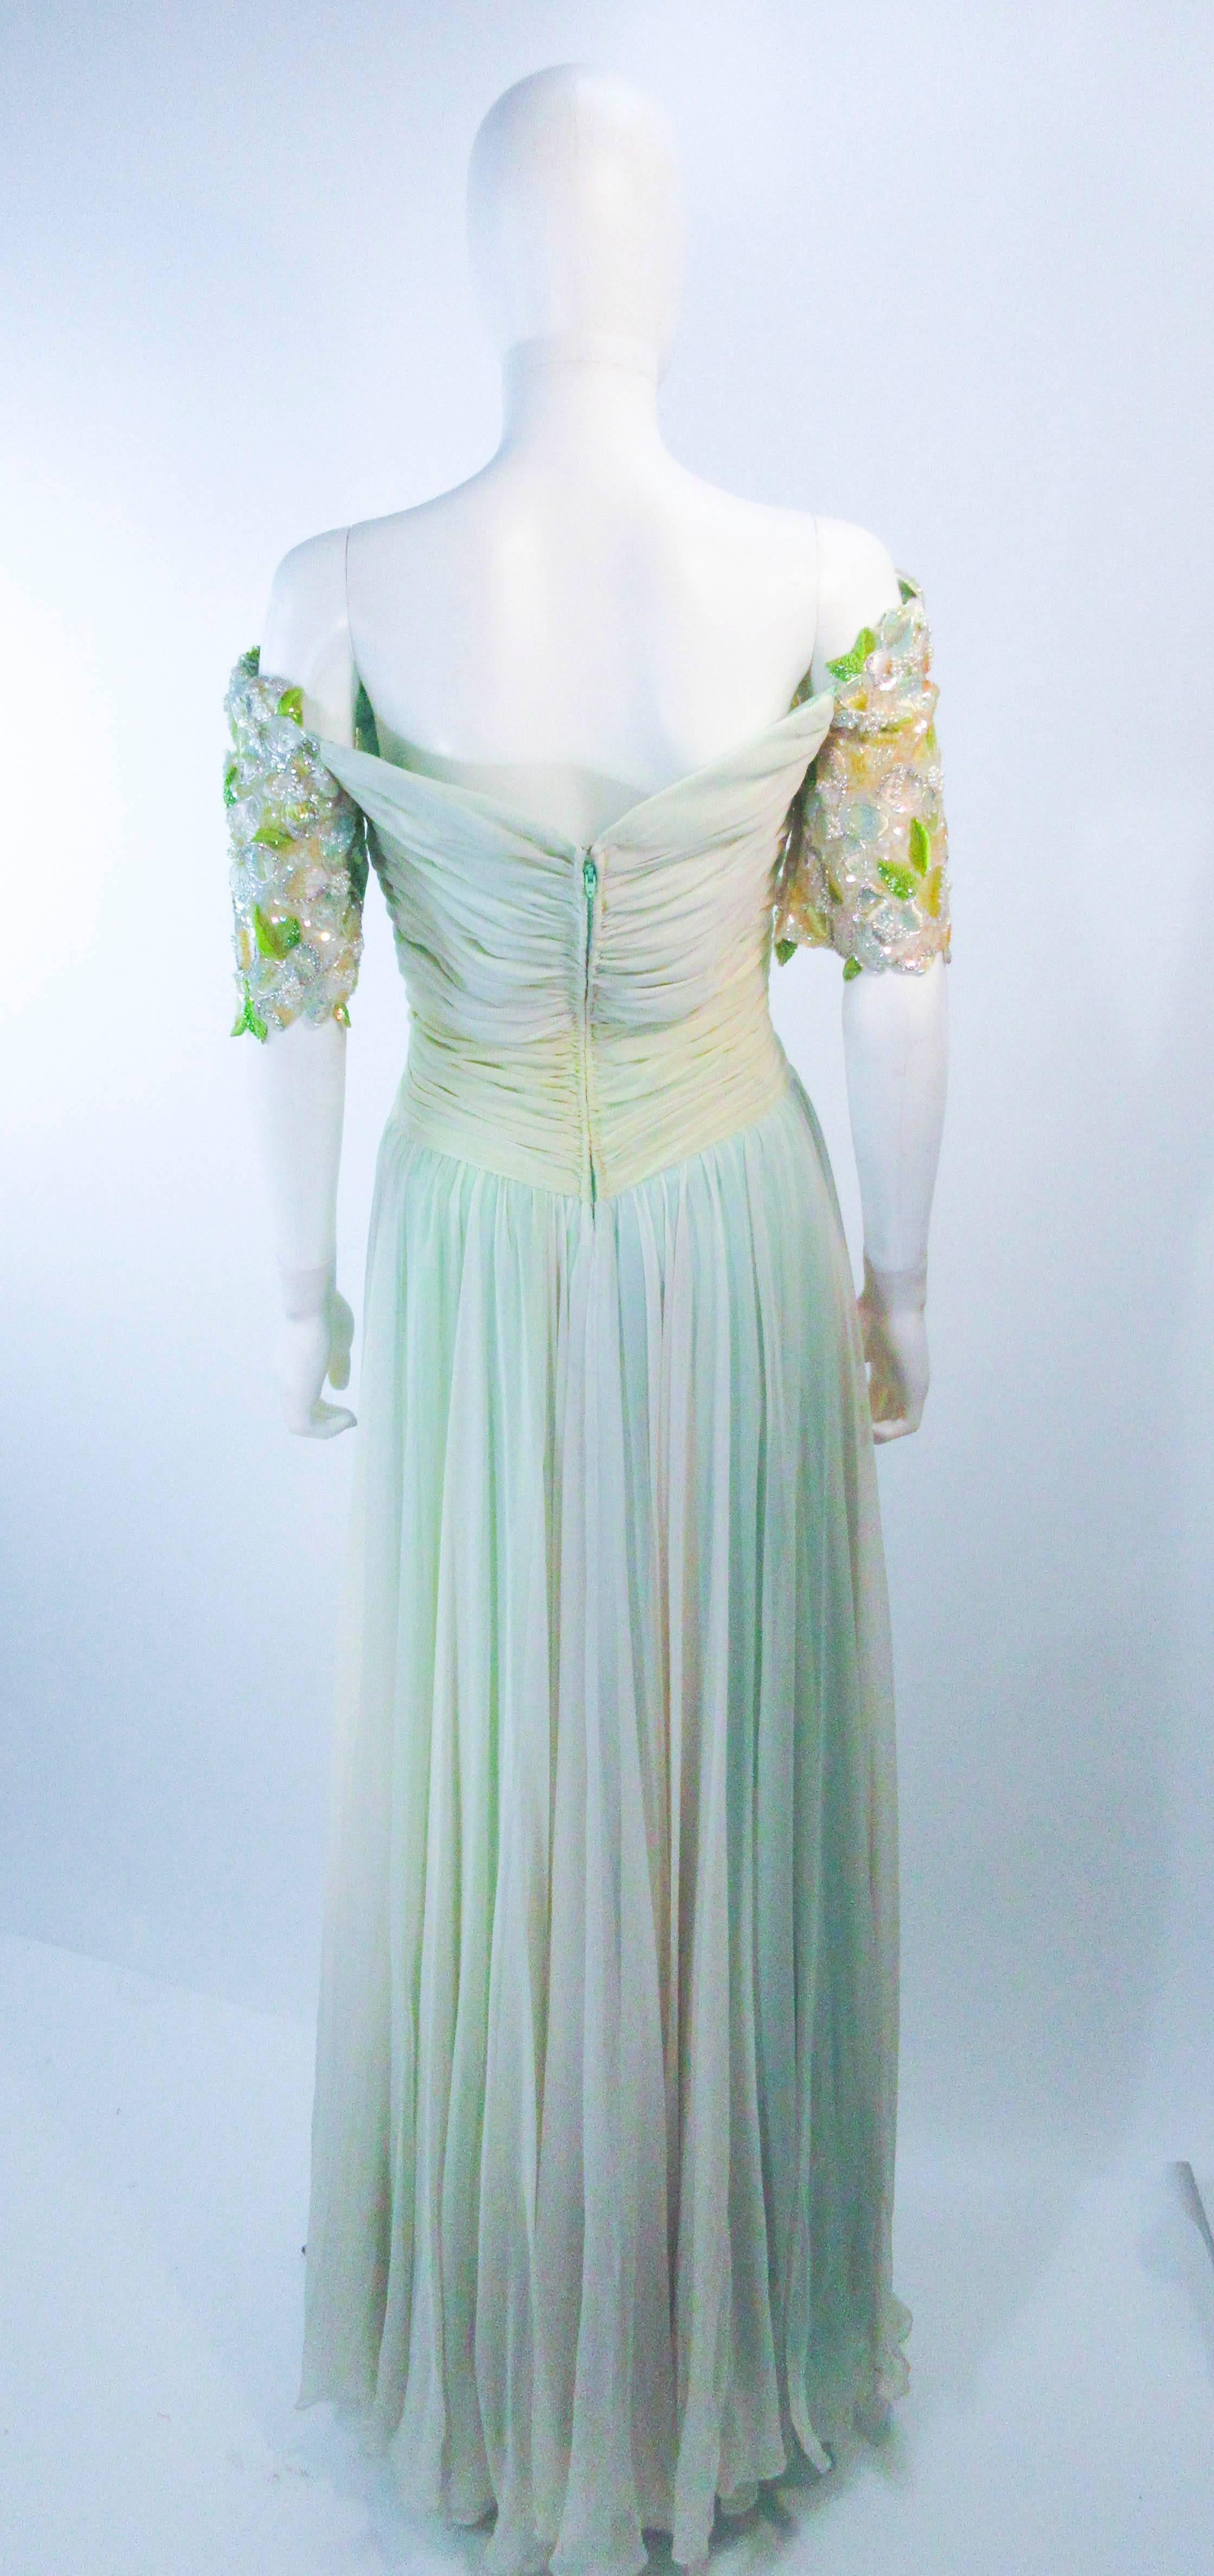 BOB MACKIE Green Chiffon Flower Embellished Gown Size 2 4 For Sale 2